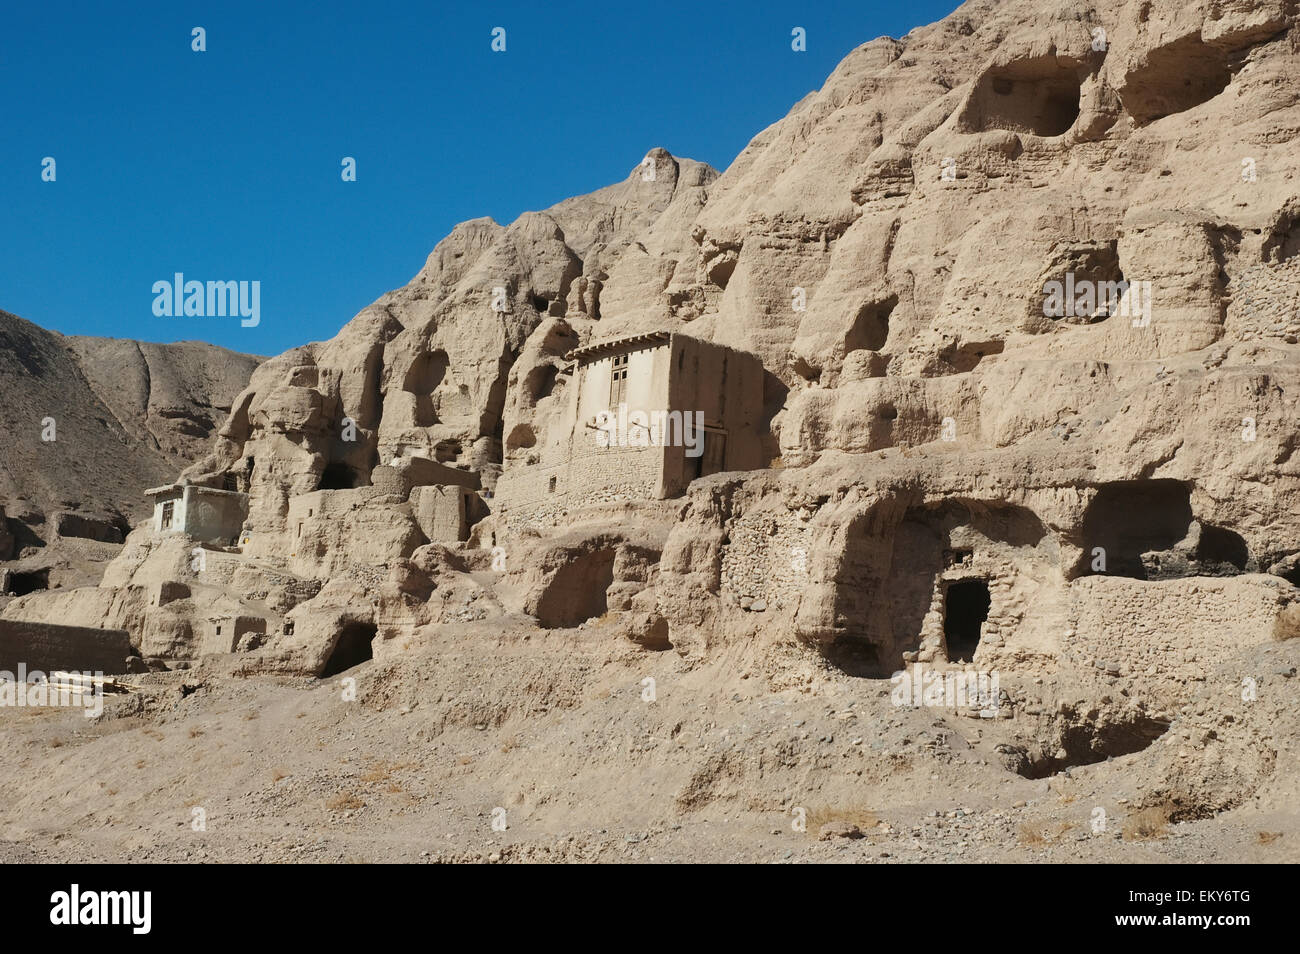 Stone And Mud Houses In The Aqrabat Valley, Bamian Province, Afghanistan Stock Photo